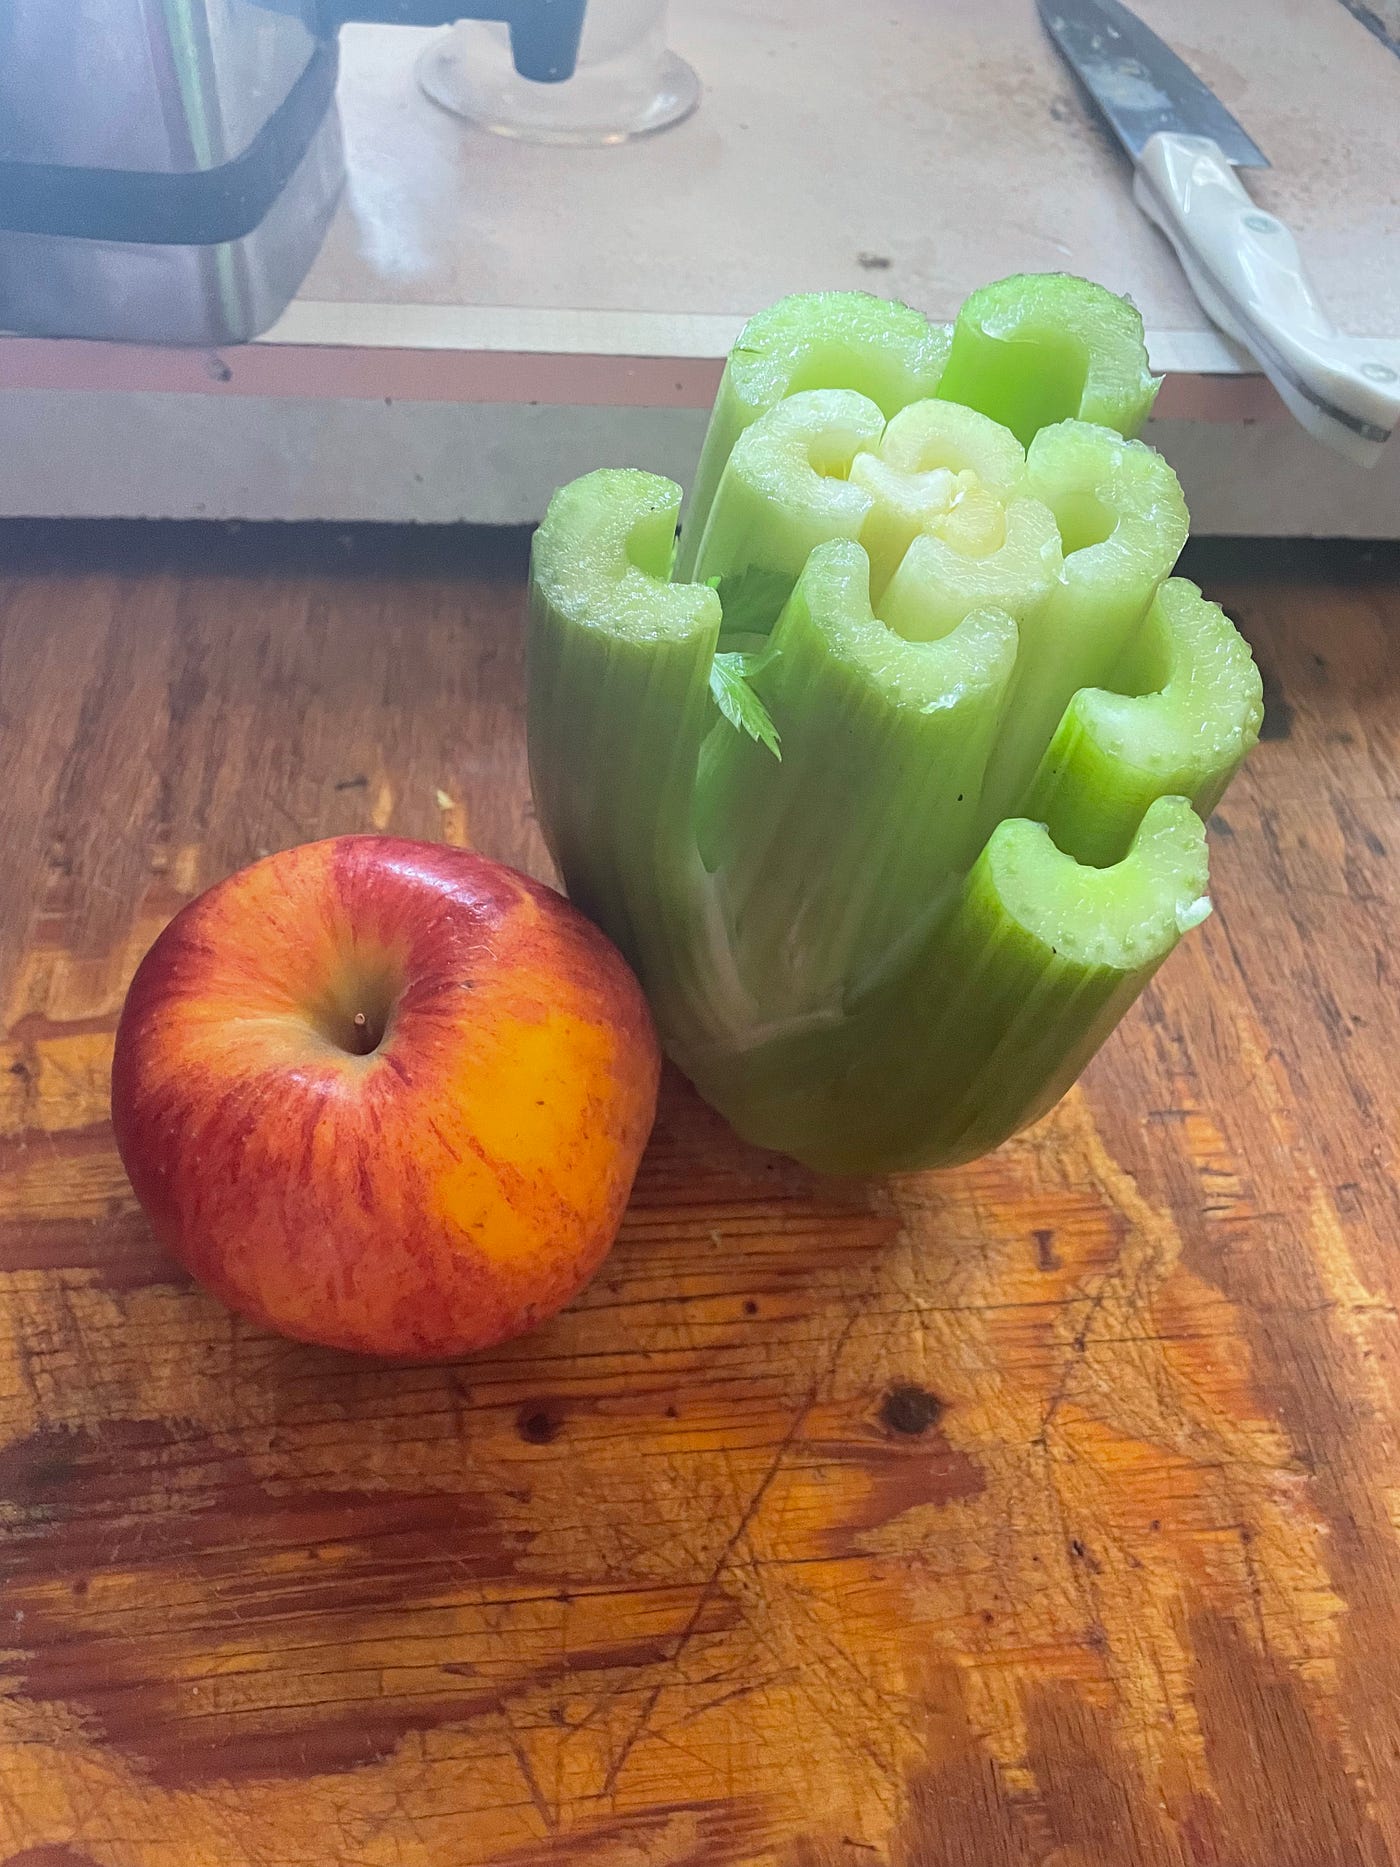 An apple and half a stock of celery on a cutting bord.